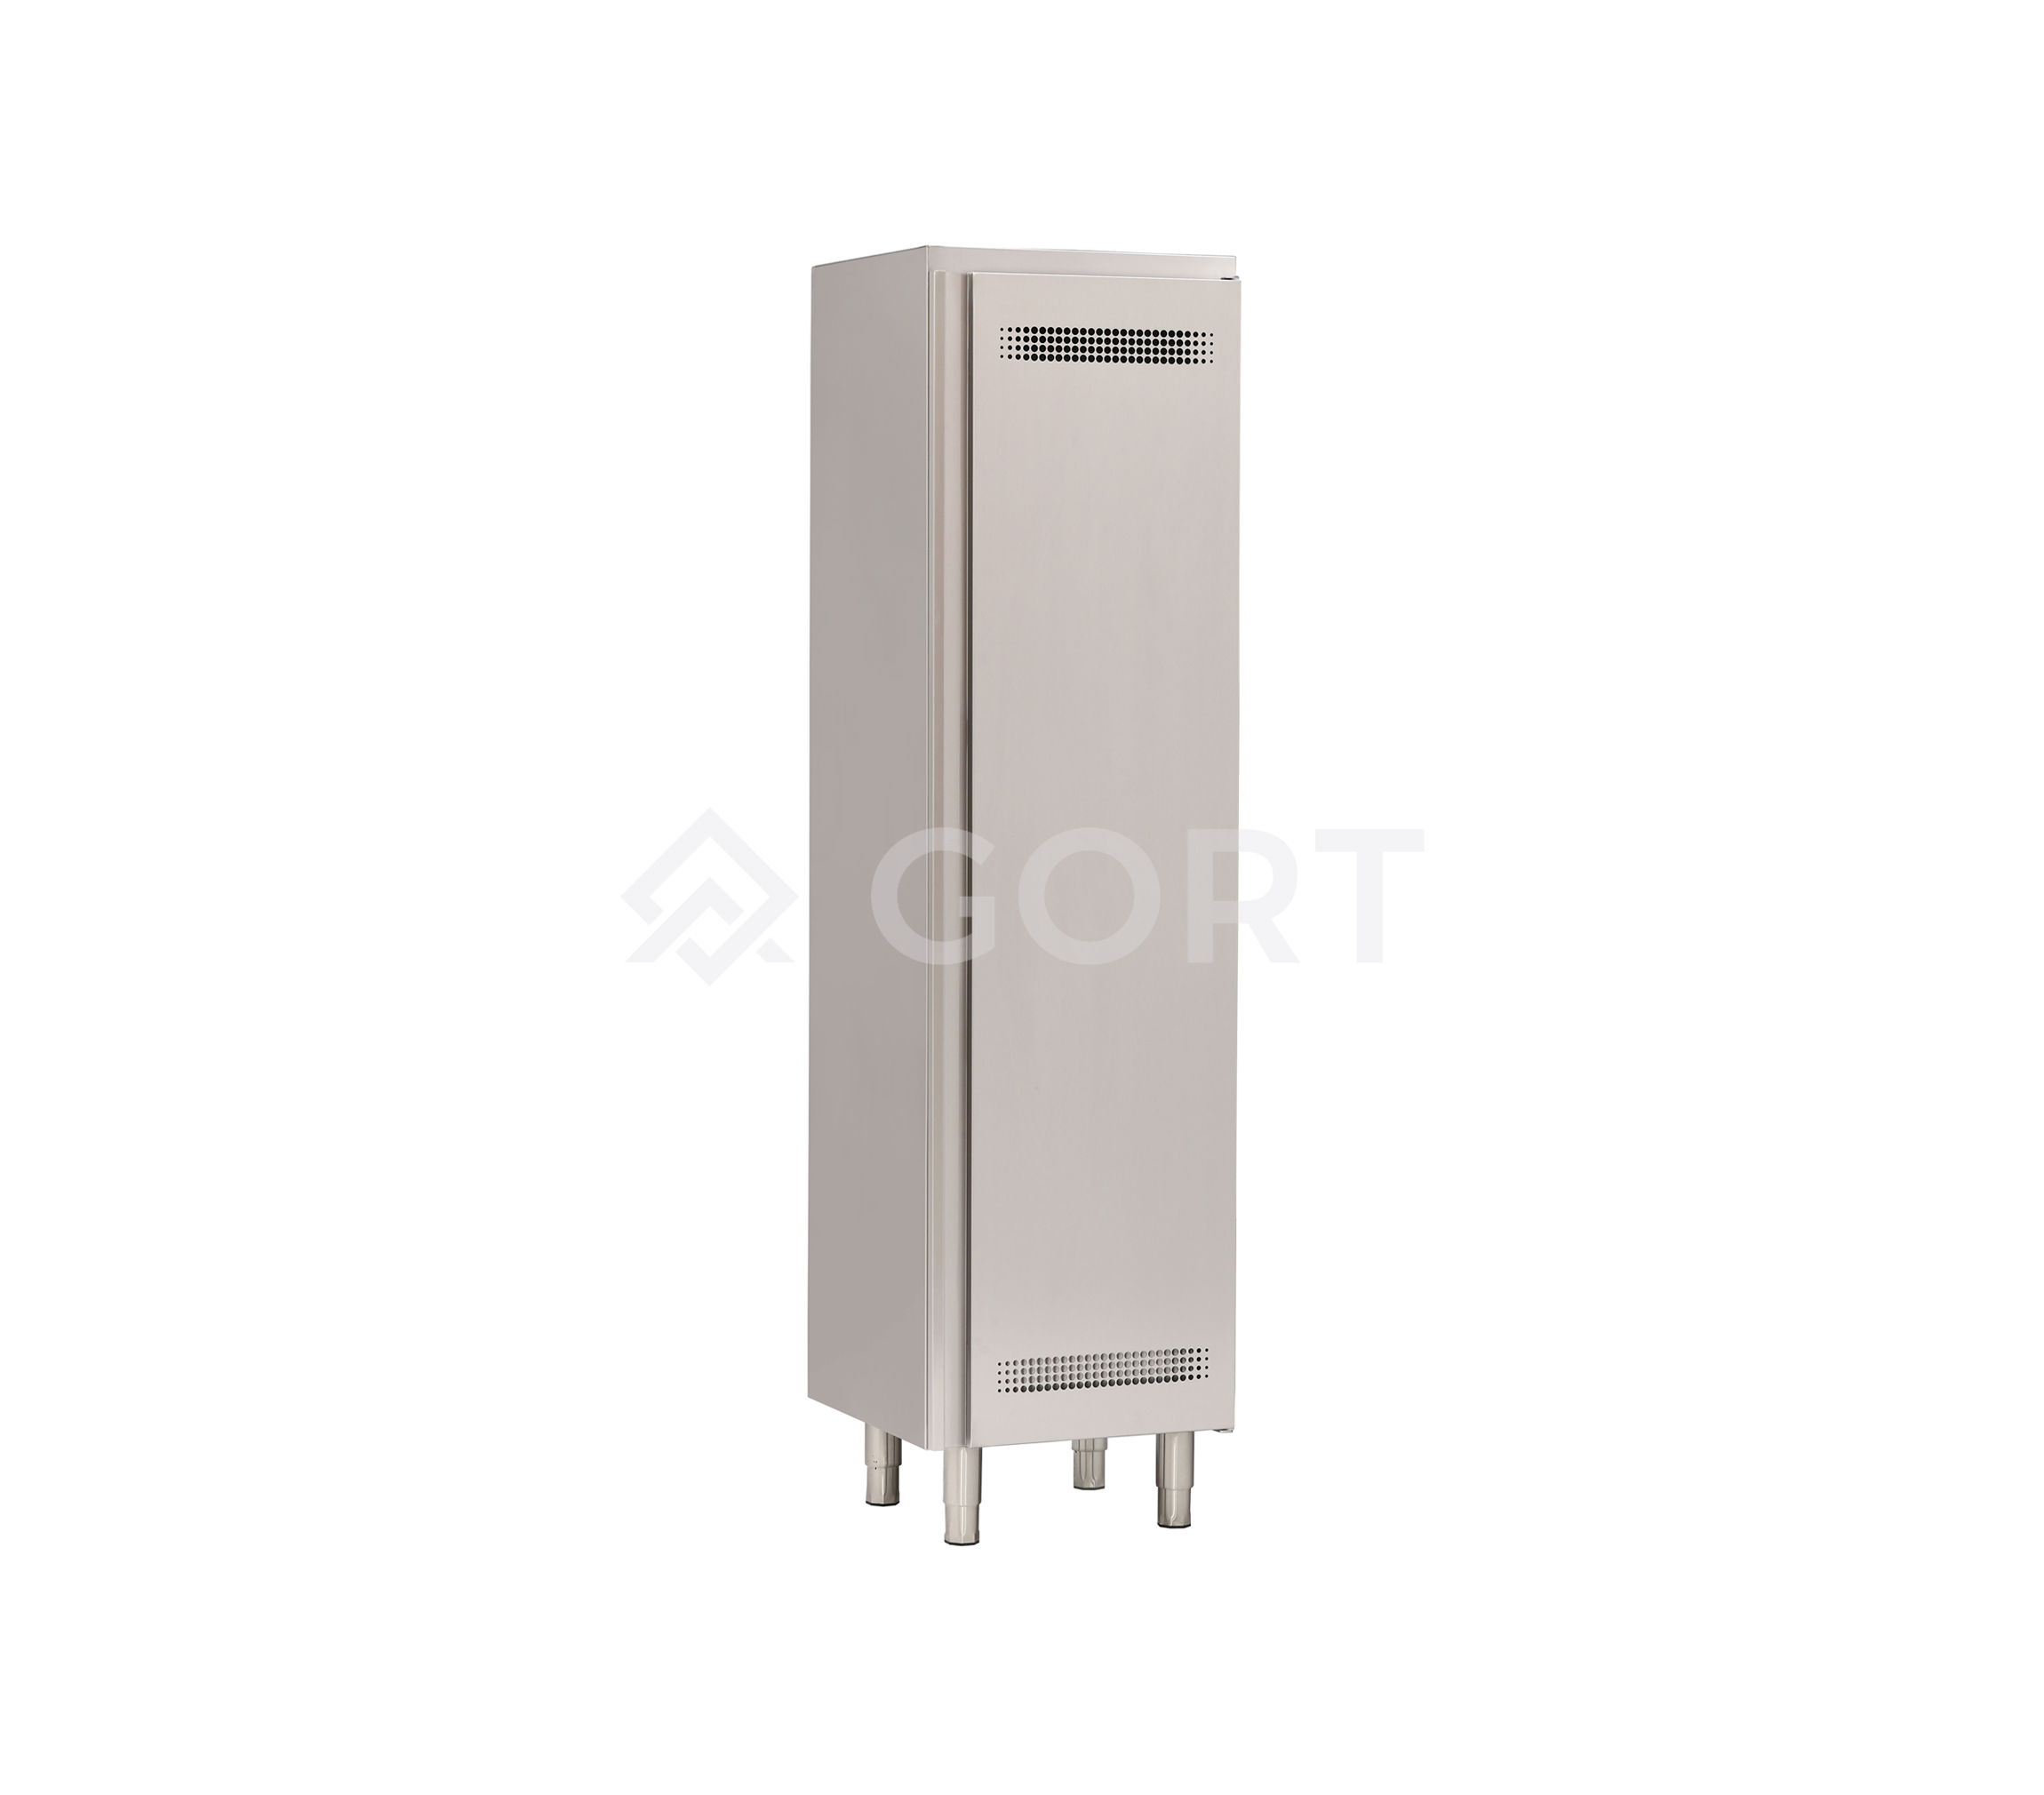 Utility cabinet with single hinged door